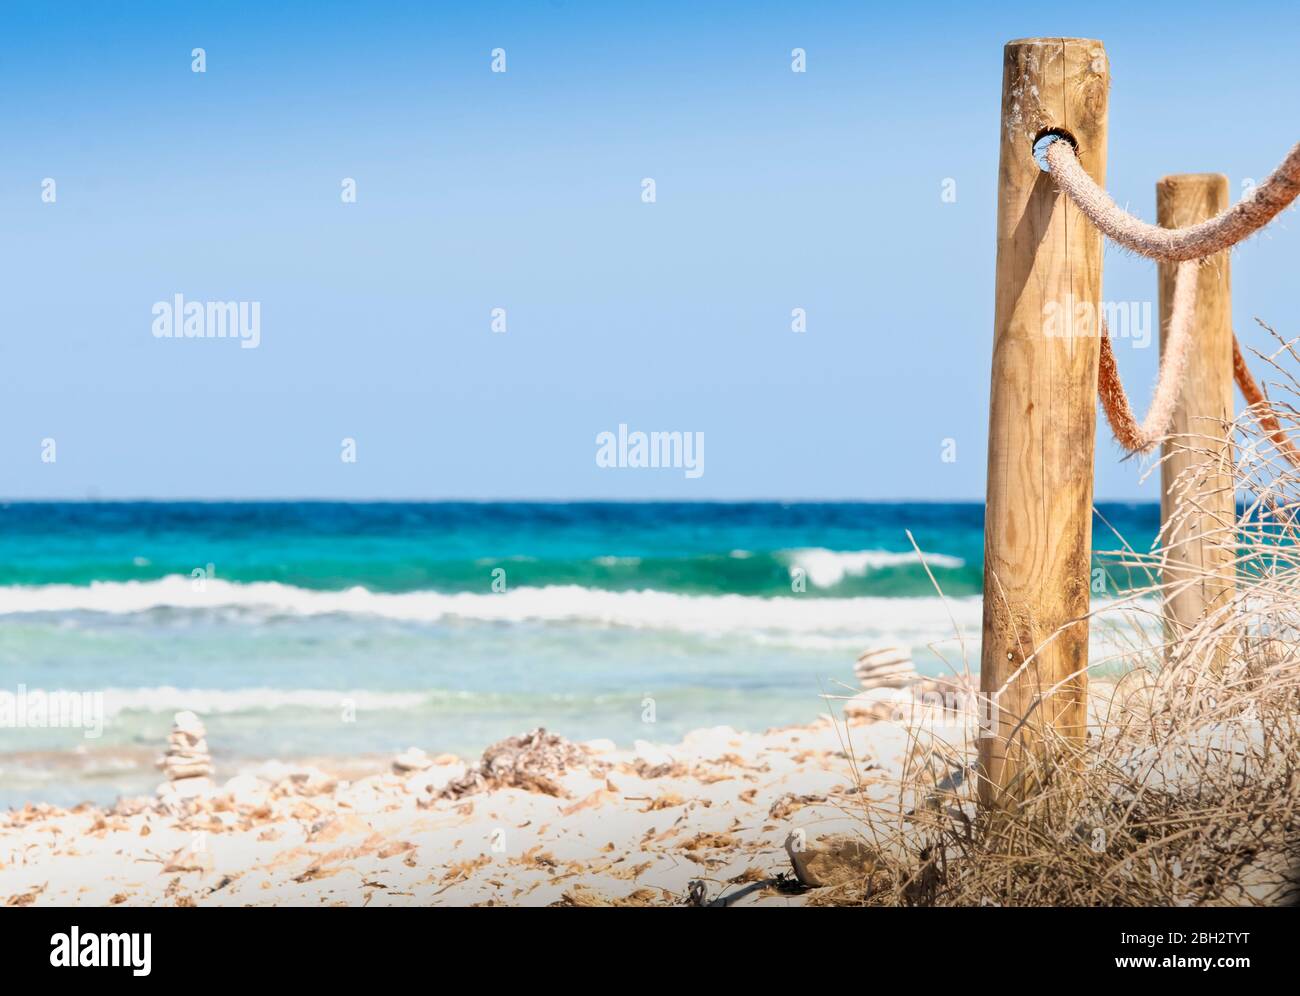 Rustic fence with wooden poles and rope on a deserted beach, in the background the rough sea. A Wild beach on the island of Formentera Spain. Stock Photo